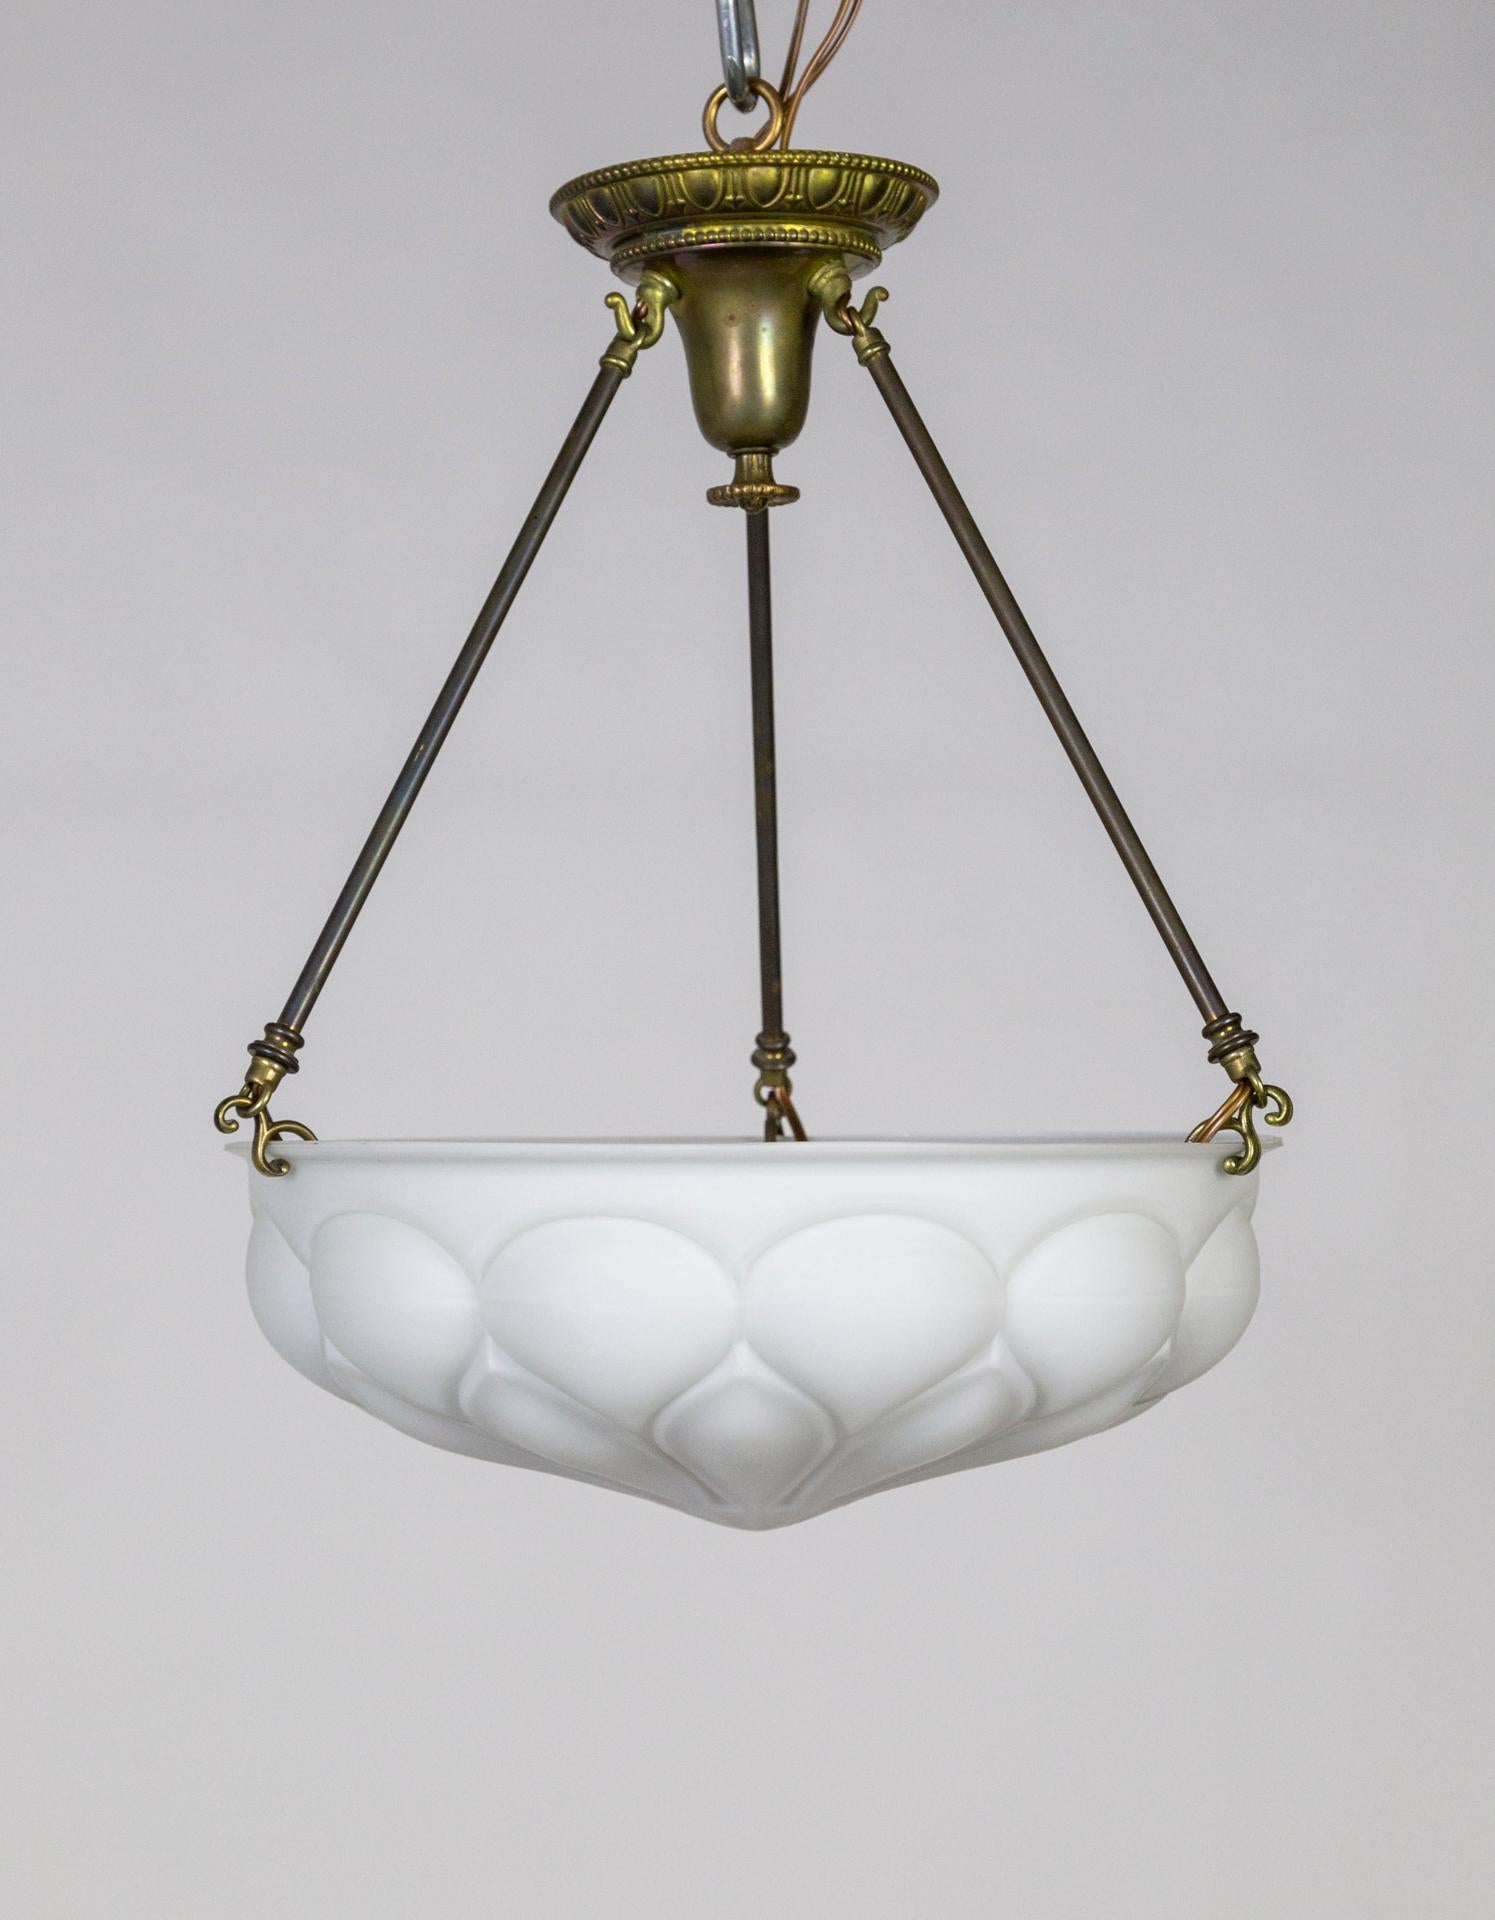 Antique, decorative, cast milk glass flower supported by gravity hooks on 3 solid brass stems. Original brass canopy, rich, antique patina. 3 medium base sockets, newly wired. When lit, the geometric pattern reveled, has a modern feel to it.